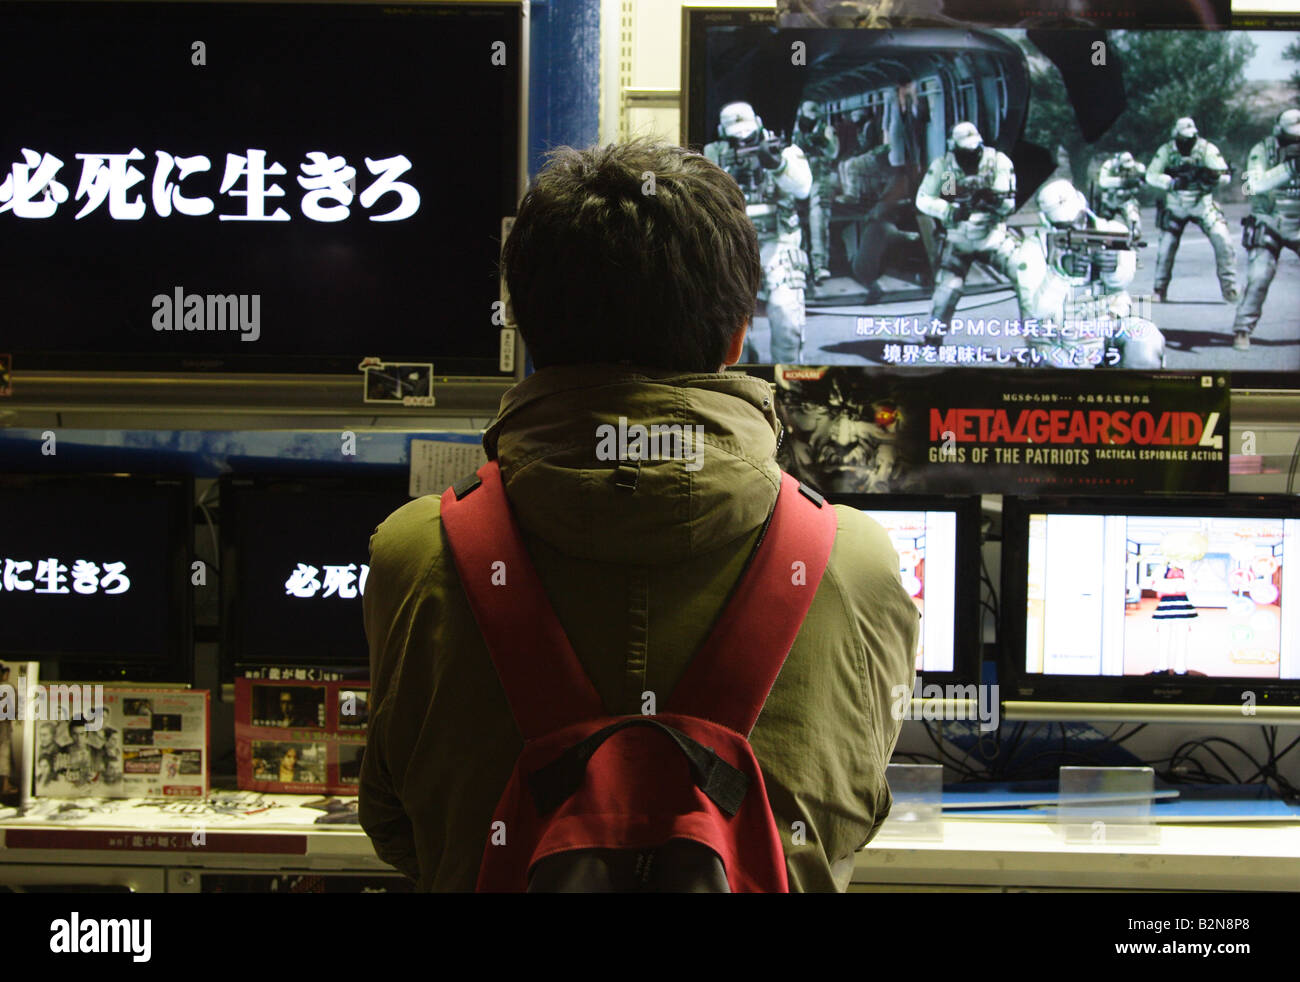 A man wearing a backpack watches video game screens in a shop in Akihabara, Tokyo, Japan Stock Photo